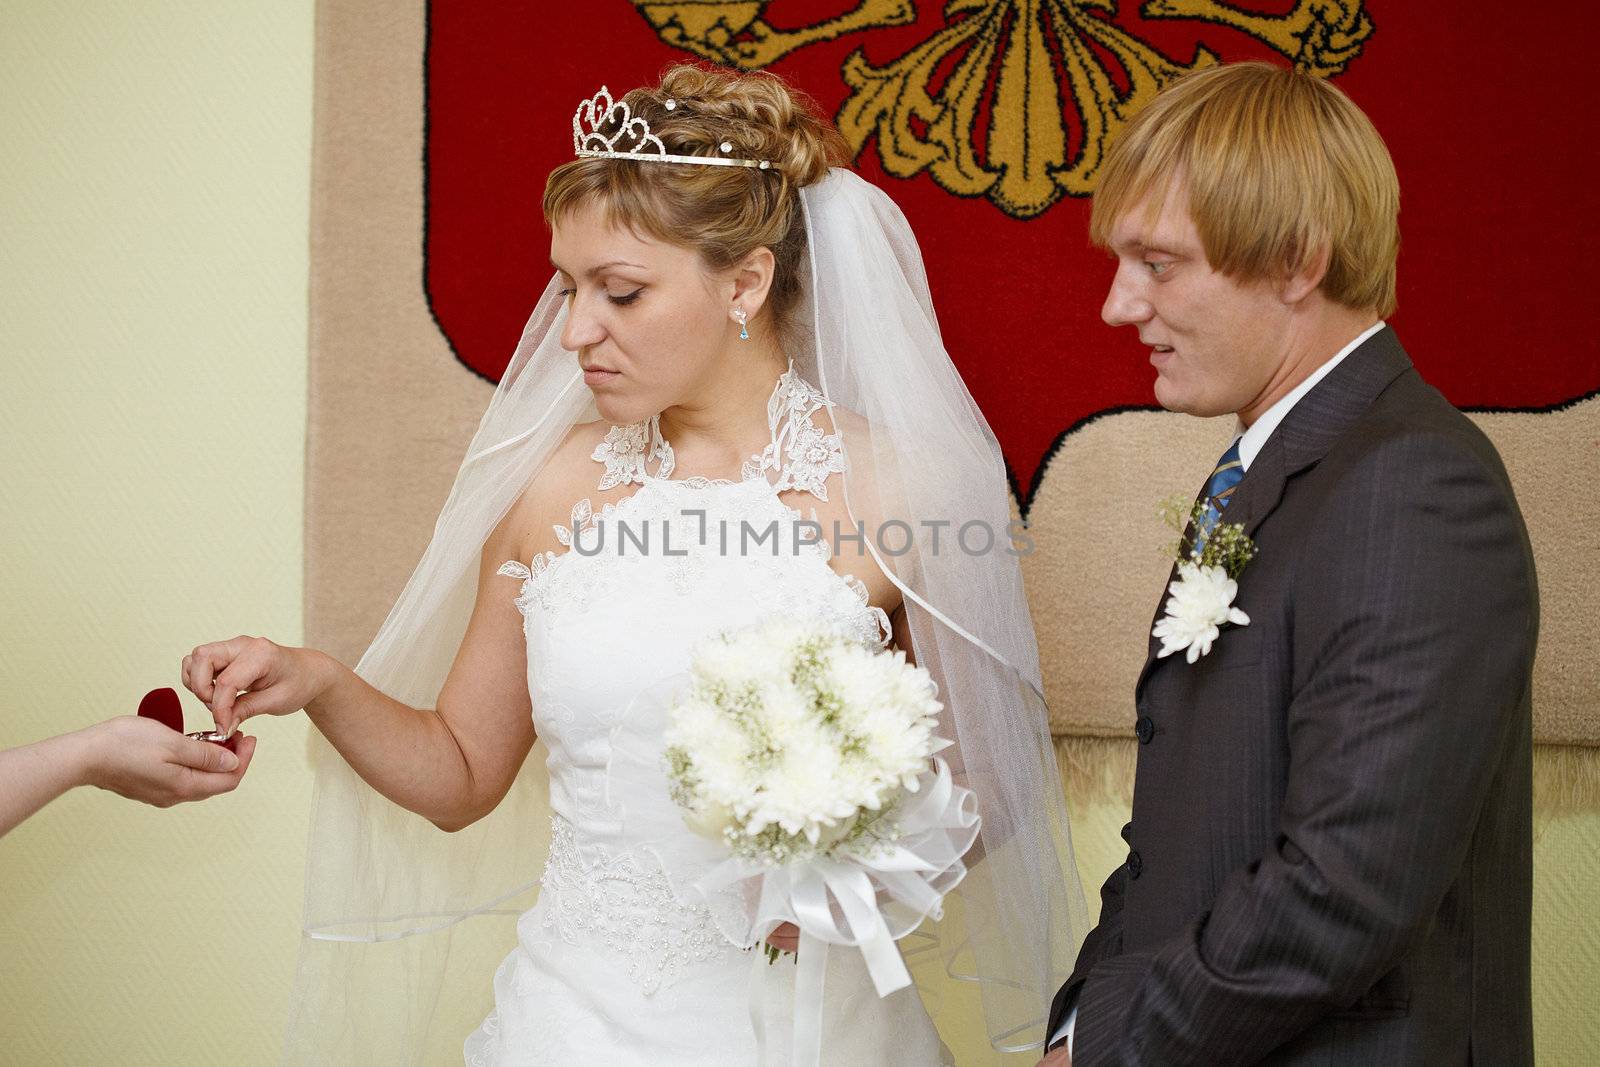 The moment of wearing of wedding rings at wedding ceremony